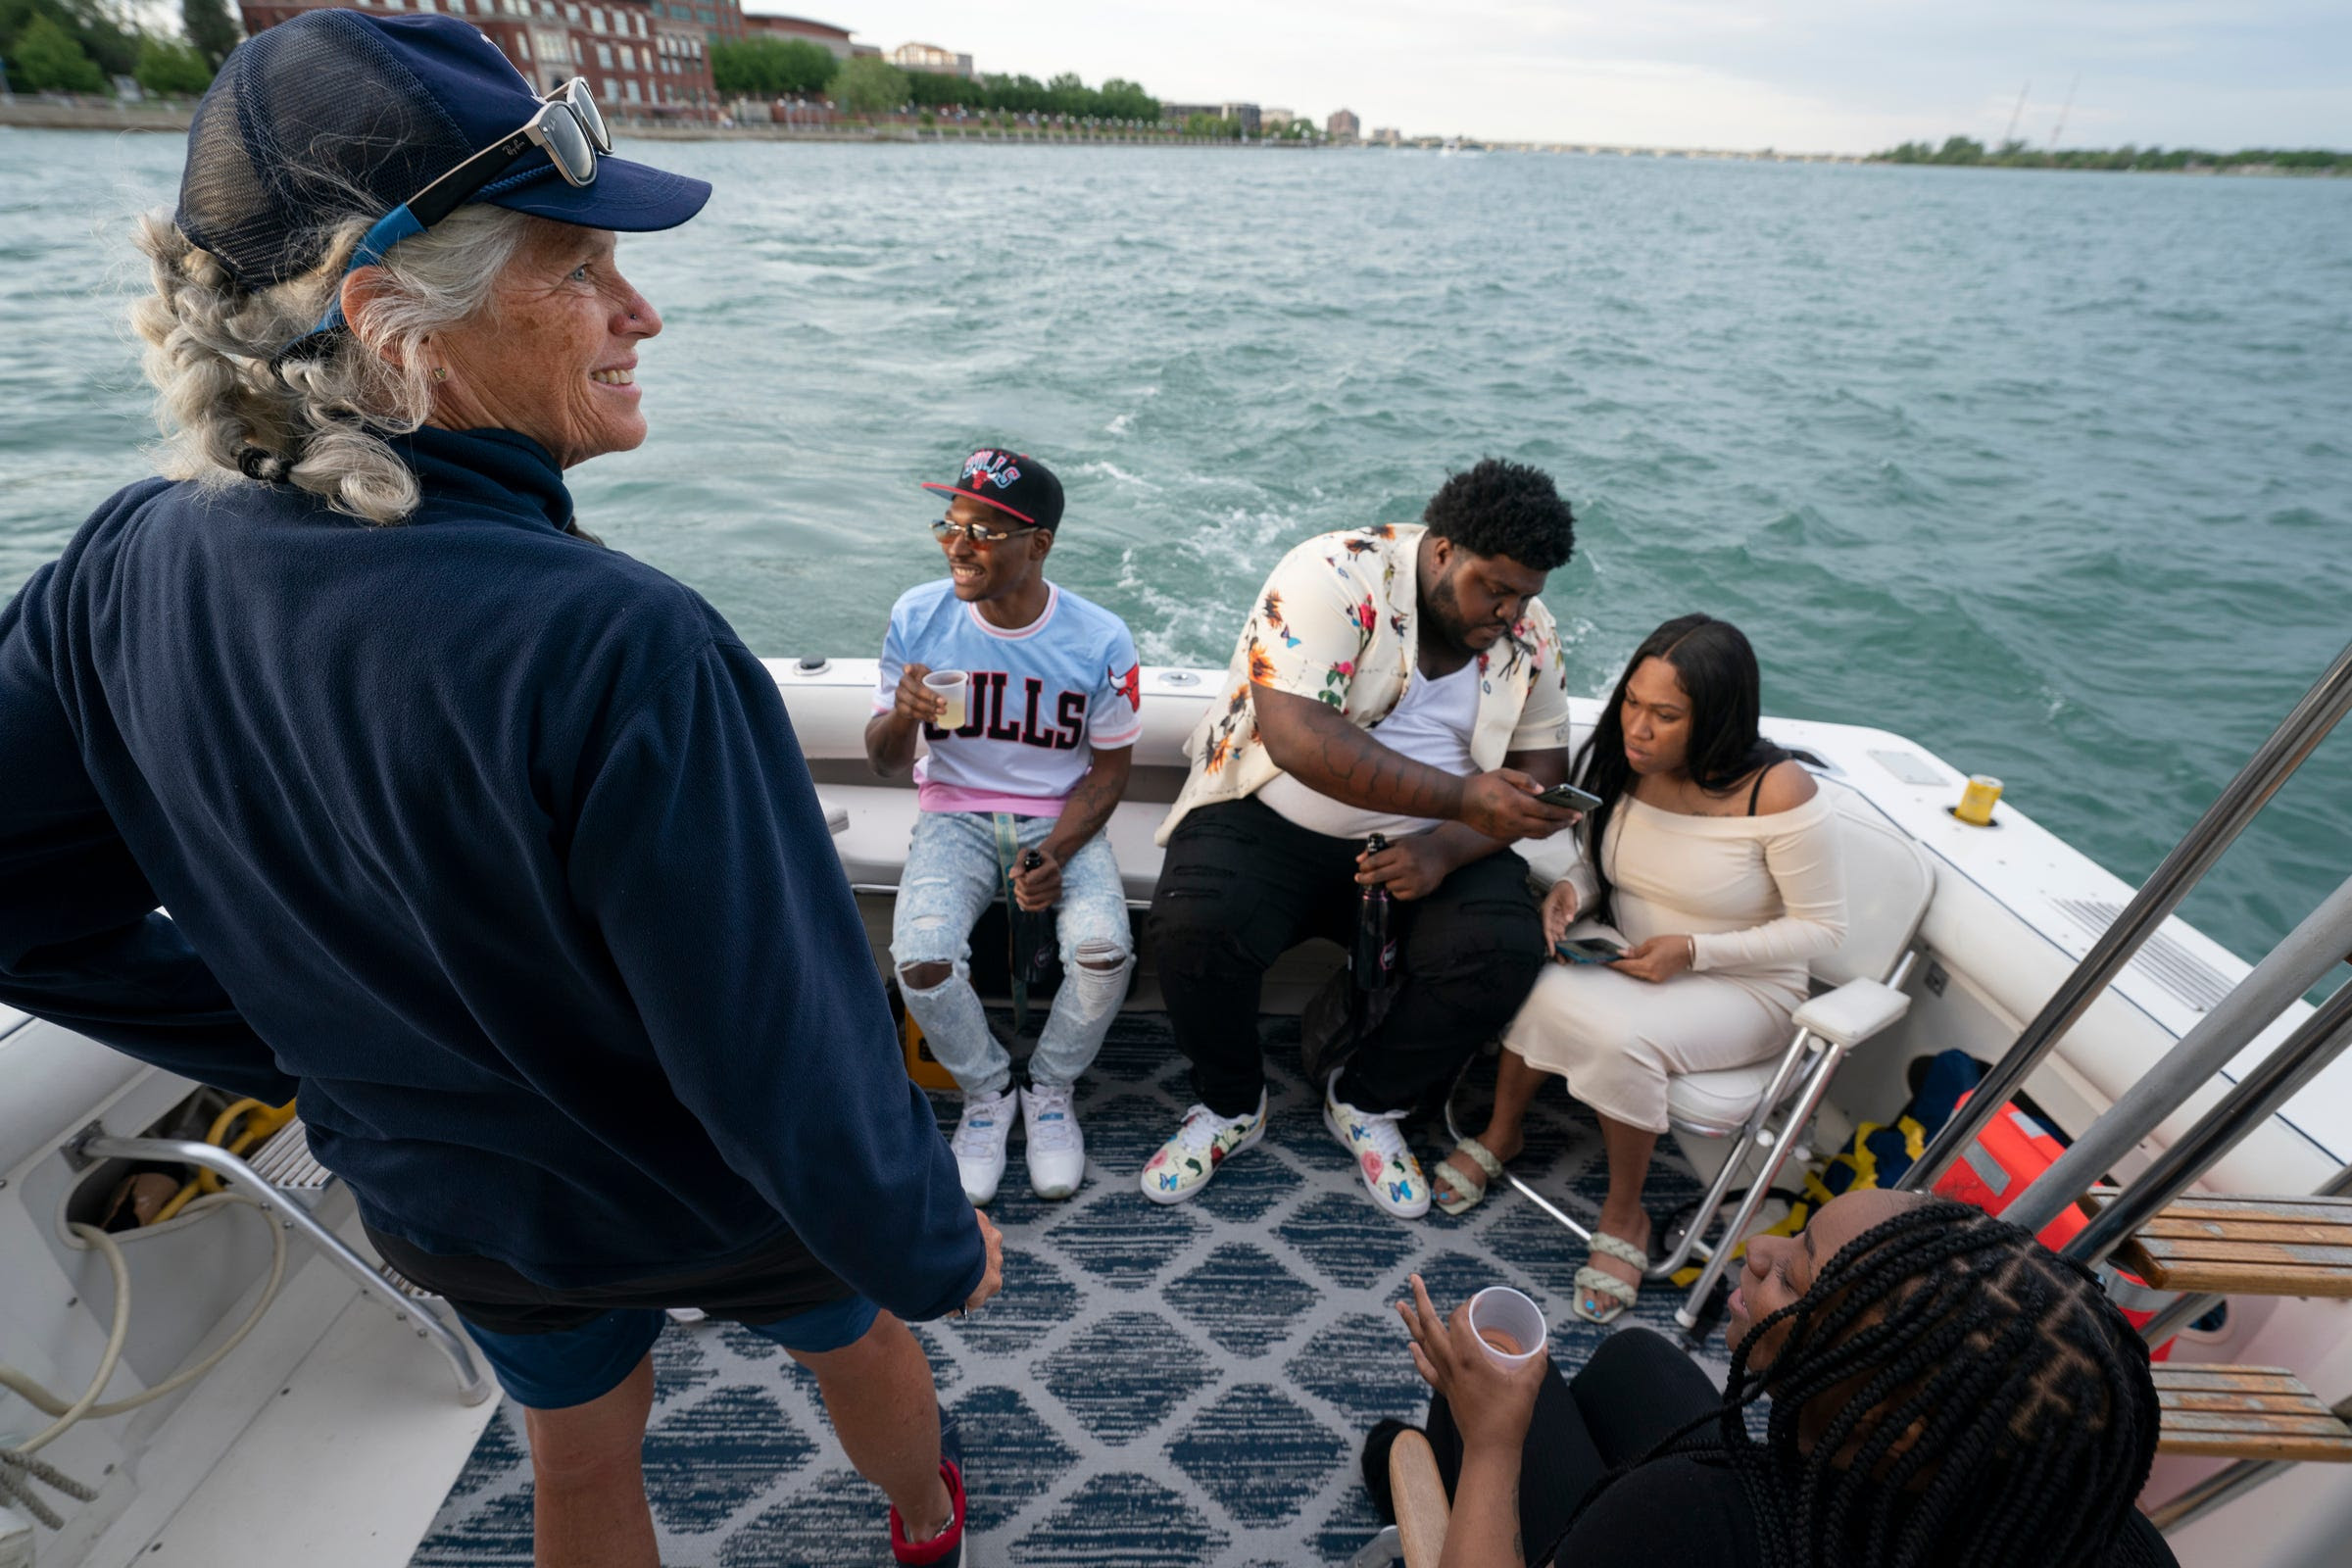 Capt. Ann Perrault, left, hangs out for a minute with clients Jalen Miller, 26, of Detroit, Drew Roberts, 26, of Lincoln Park, Chi Chi Dean, 26, of Detroit, and Lasha Young, 25, of Southfield, during a cruise in the Bertram 33, a boat used by Perrault's company Riverwise Detroit Boat Tours for charter trips on the Detroit River.